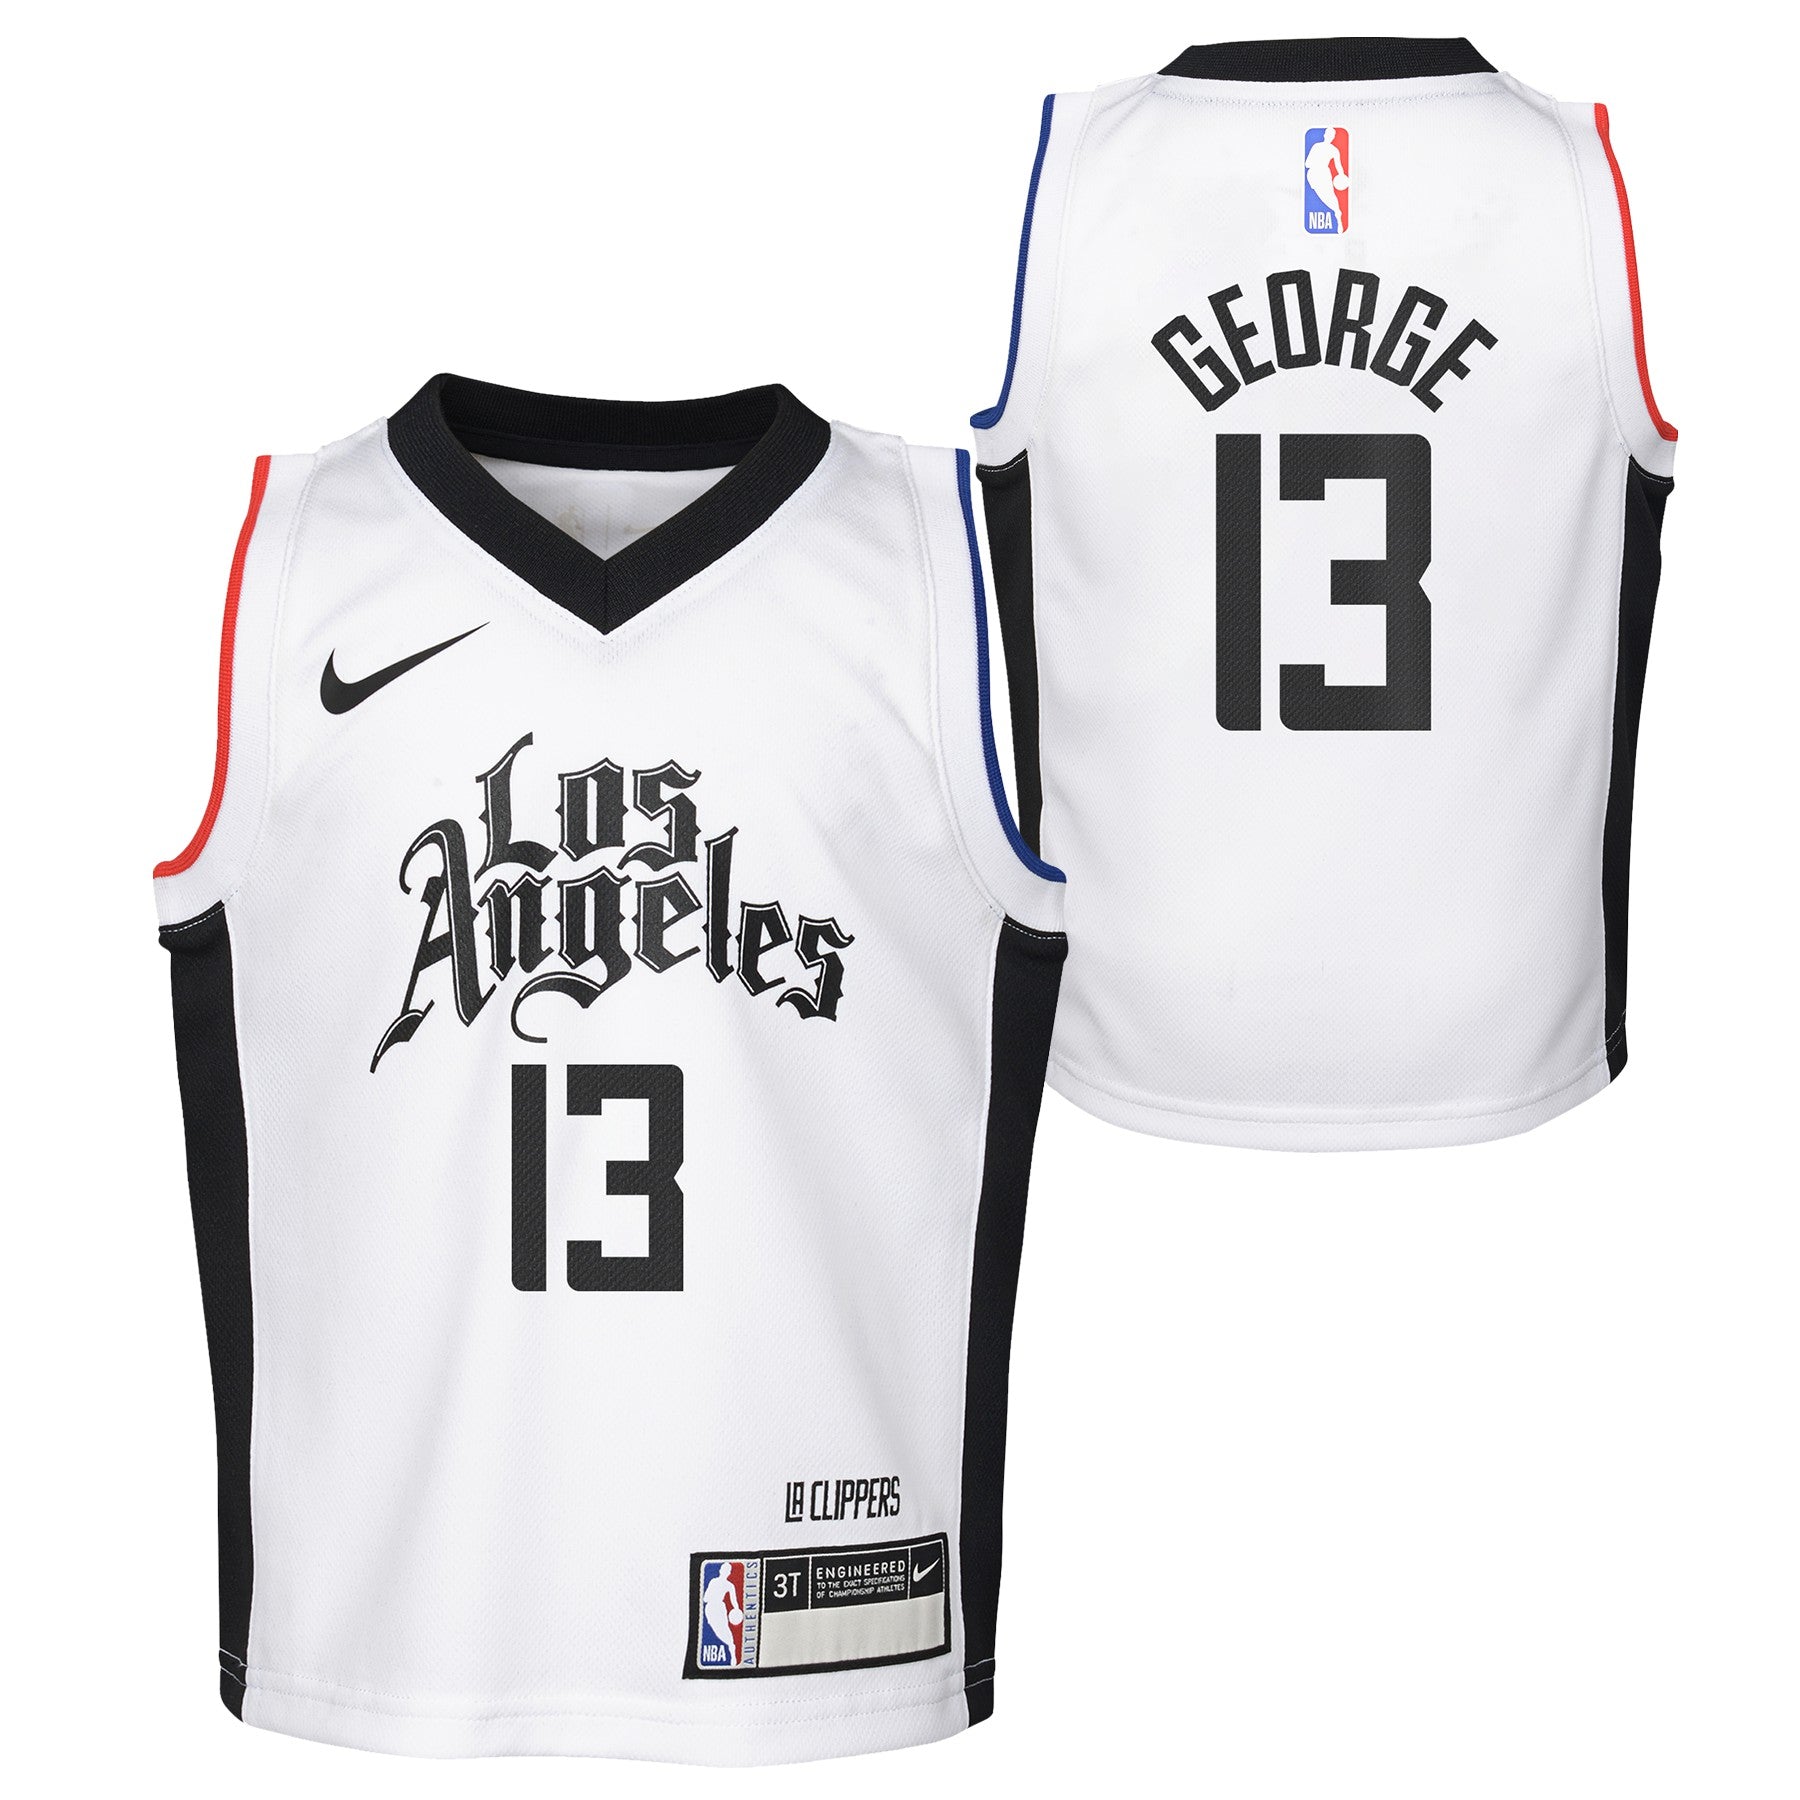 Nike Youth 2021-22 City Edition Los Angeles Clippers Paul George #13 Swingman Jersey - Blue - S - S (Small)